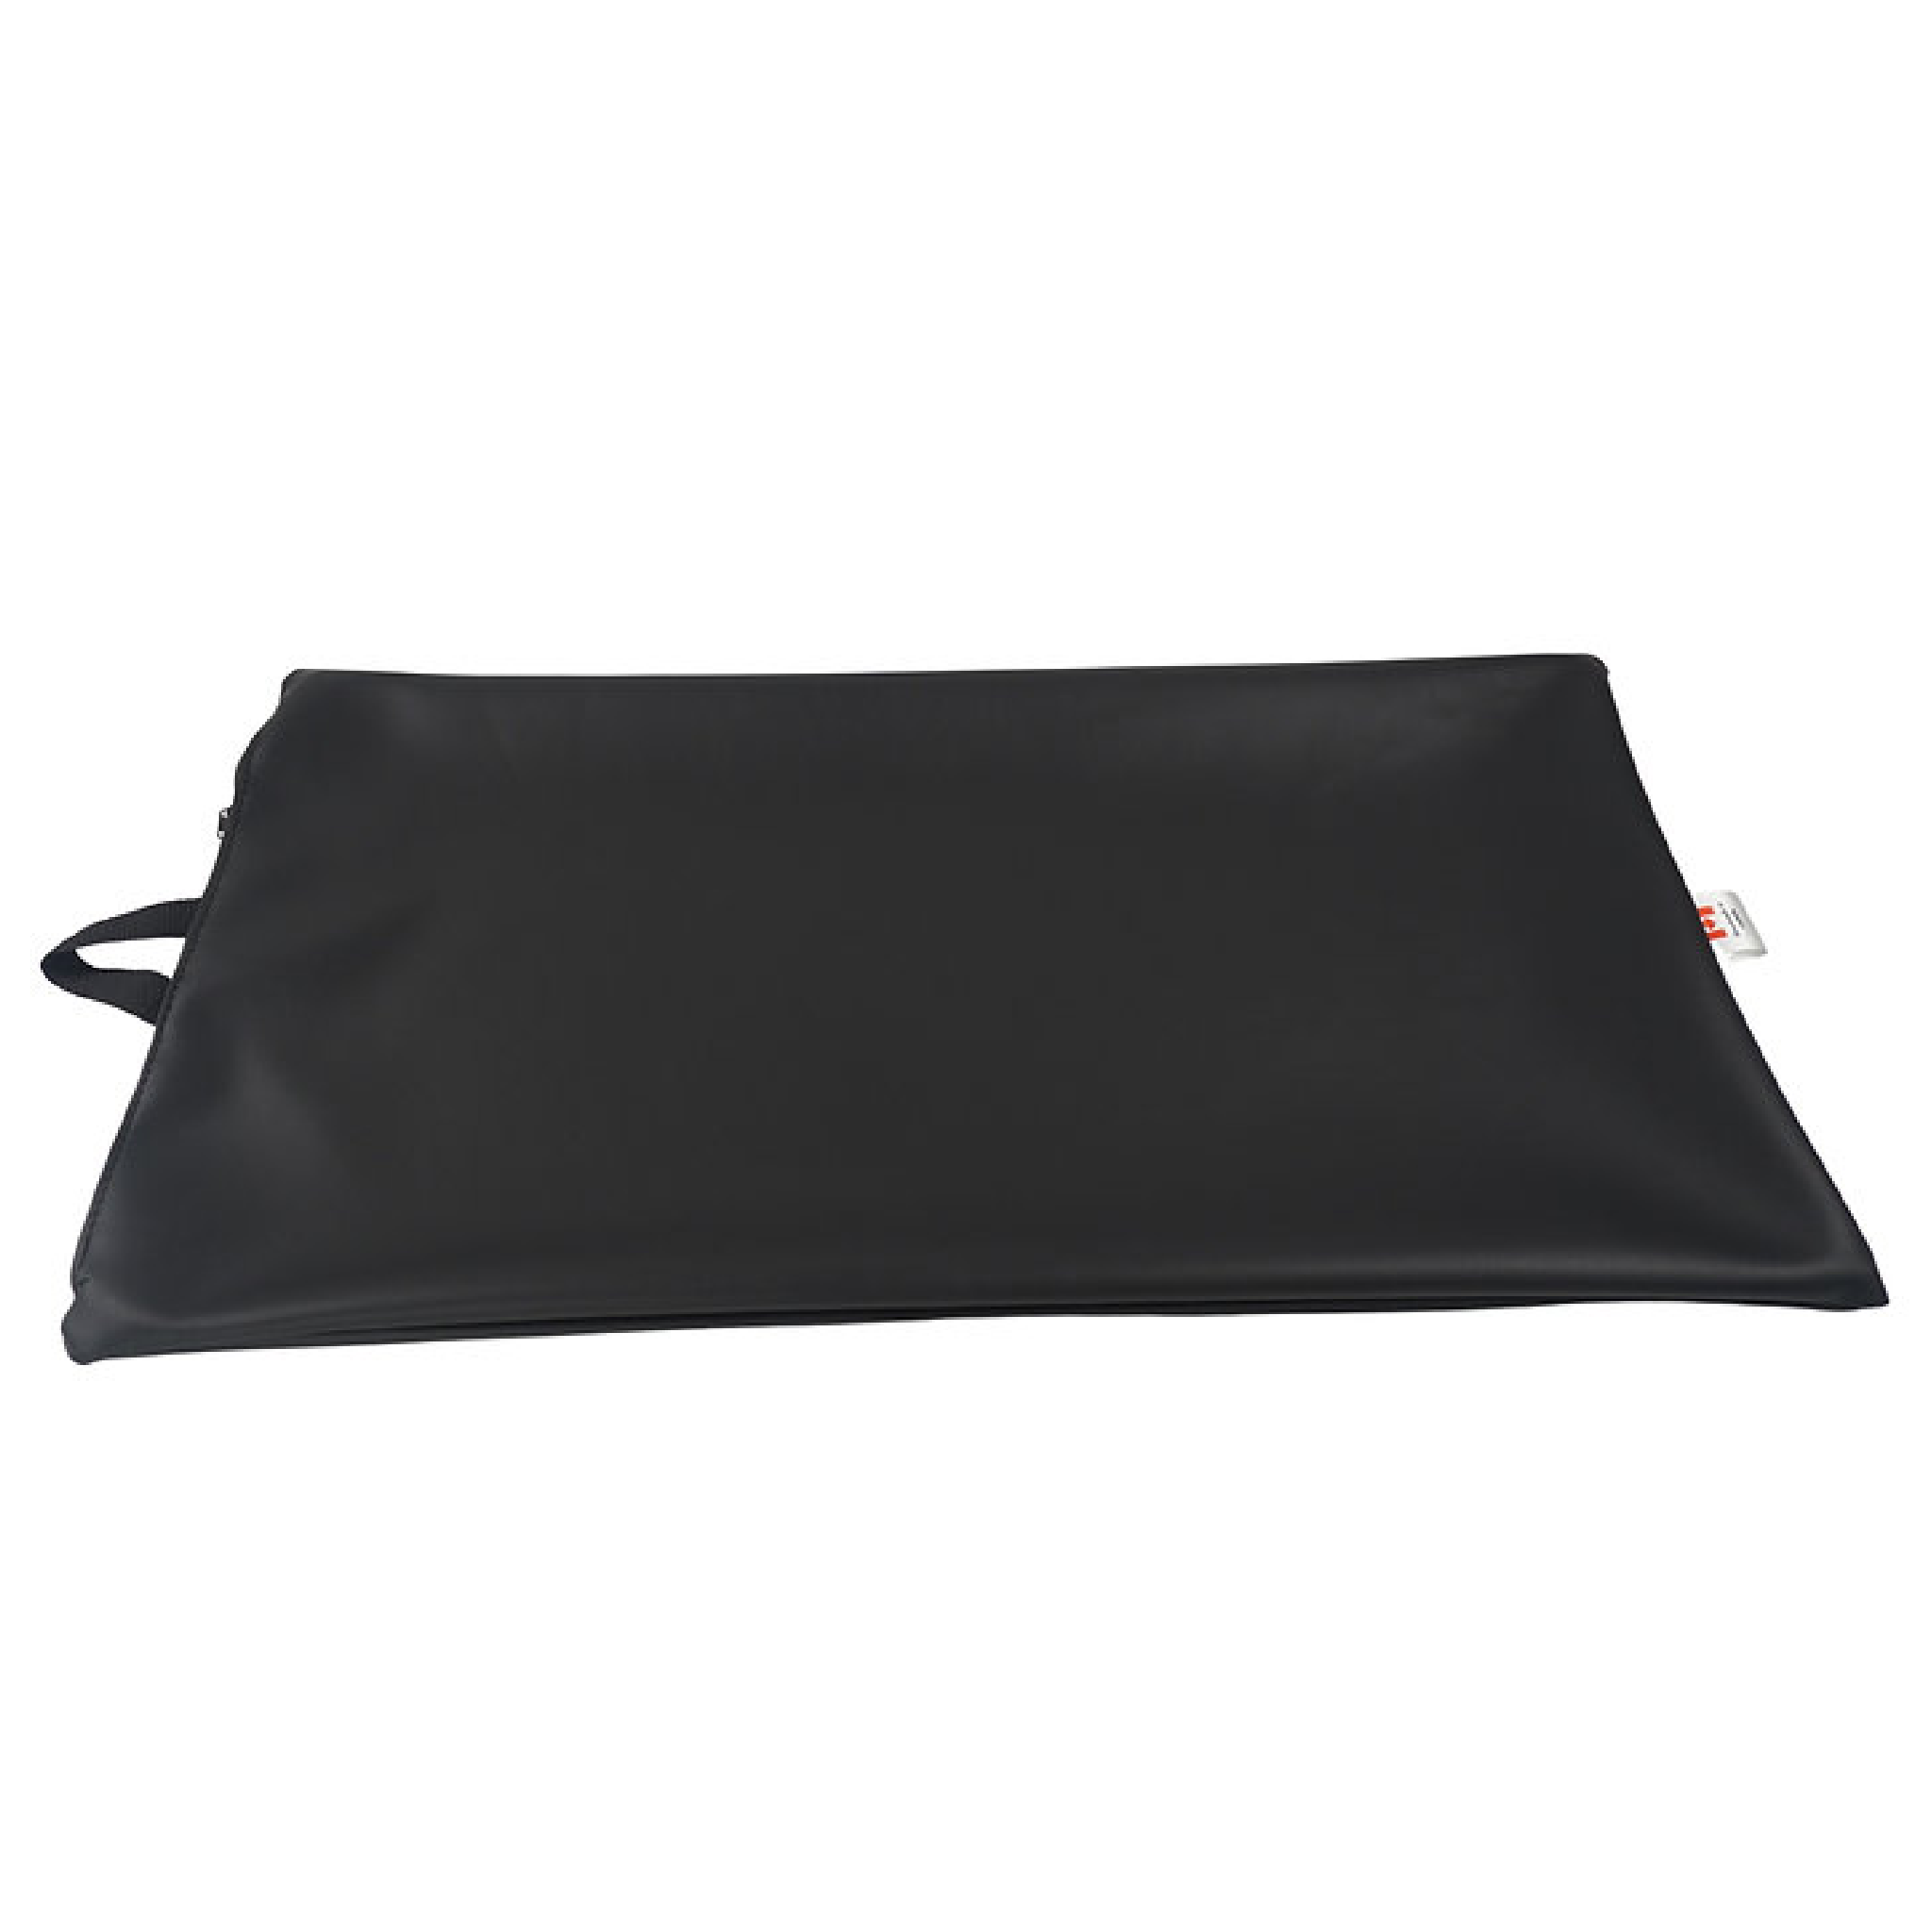 Thermophore TheraTherm Heating Pad Cover Vinyl